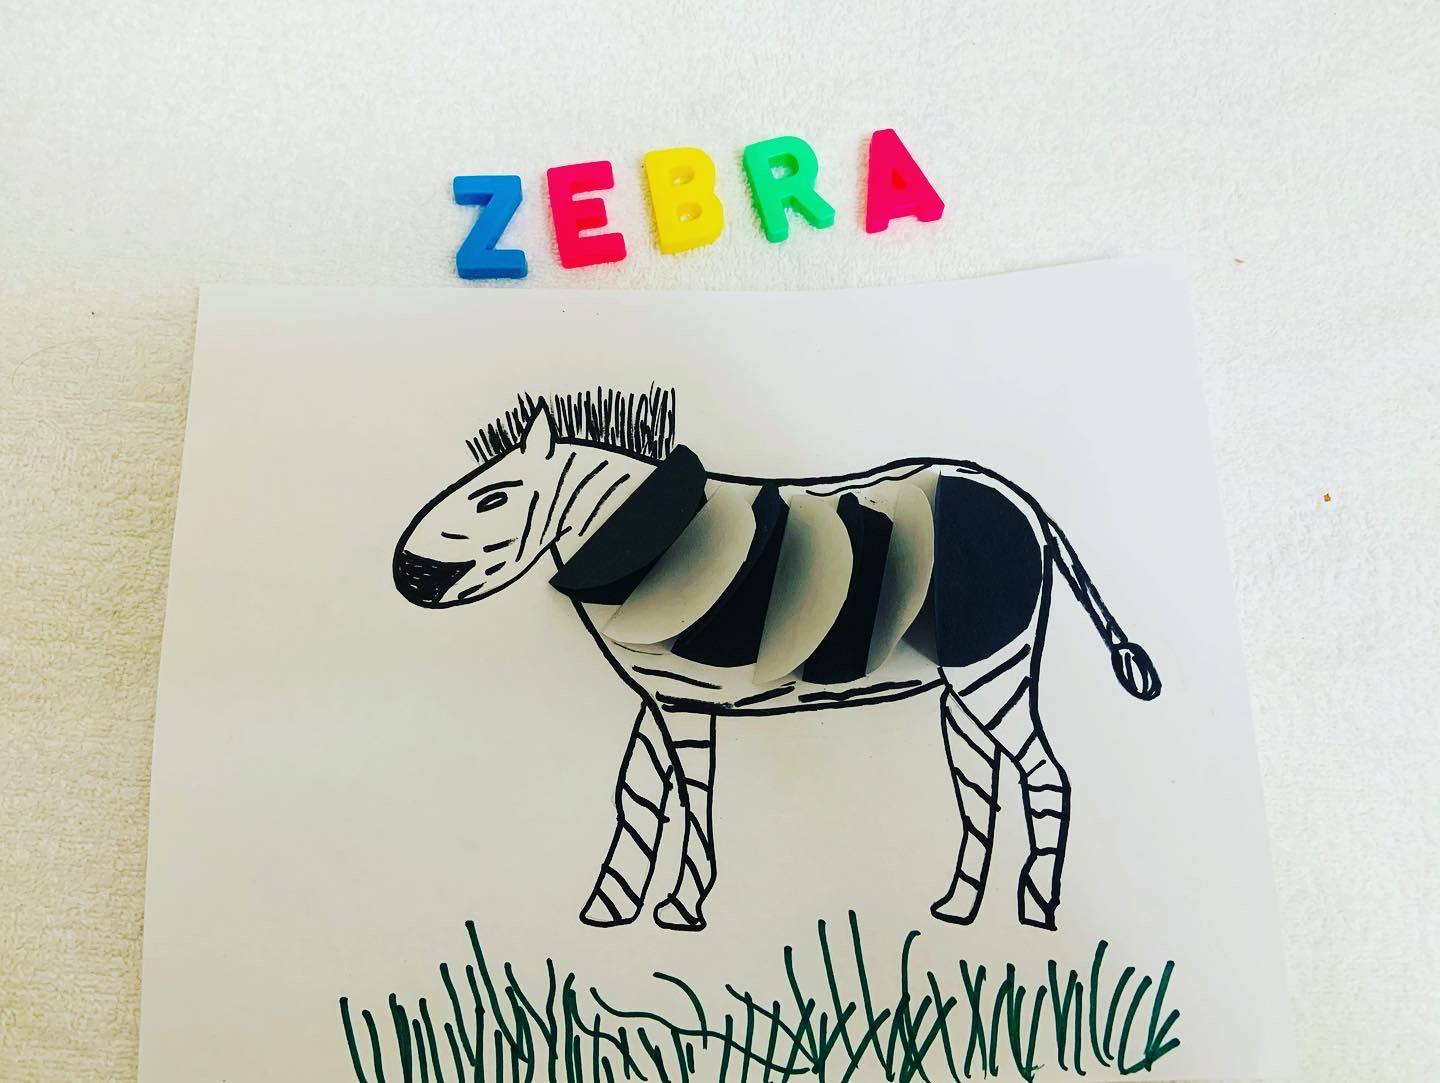 Art Projects for Kids - Here's how to draw a cartoon zebra and have some  fun with his stripes. This one has them wrapped from head to toe.  https://artprojectsforkids.org/how-to-draw-a-cartoon-zebra/ #howtodraw  #tutorial #drawing #